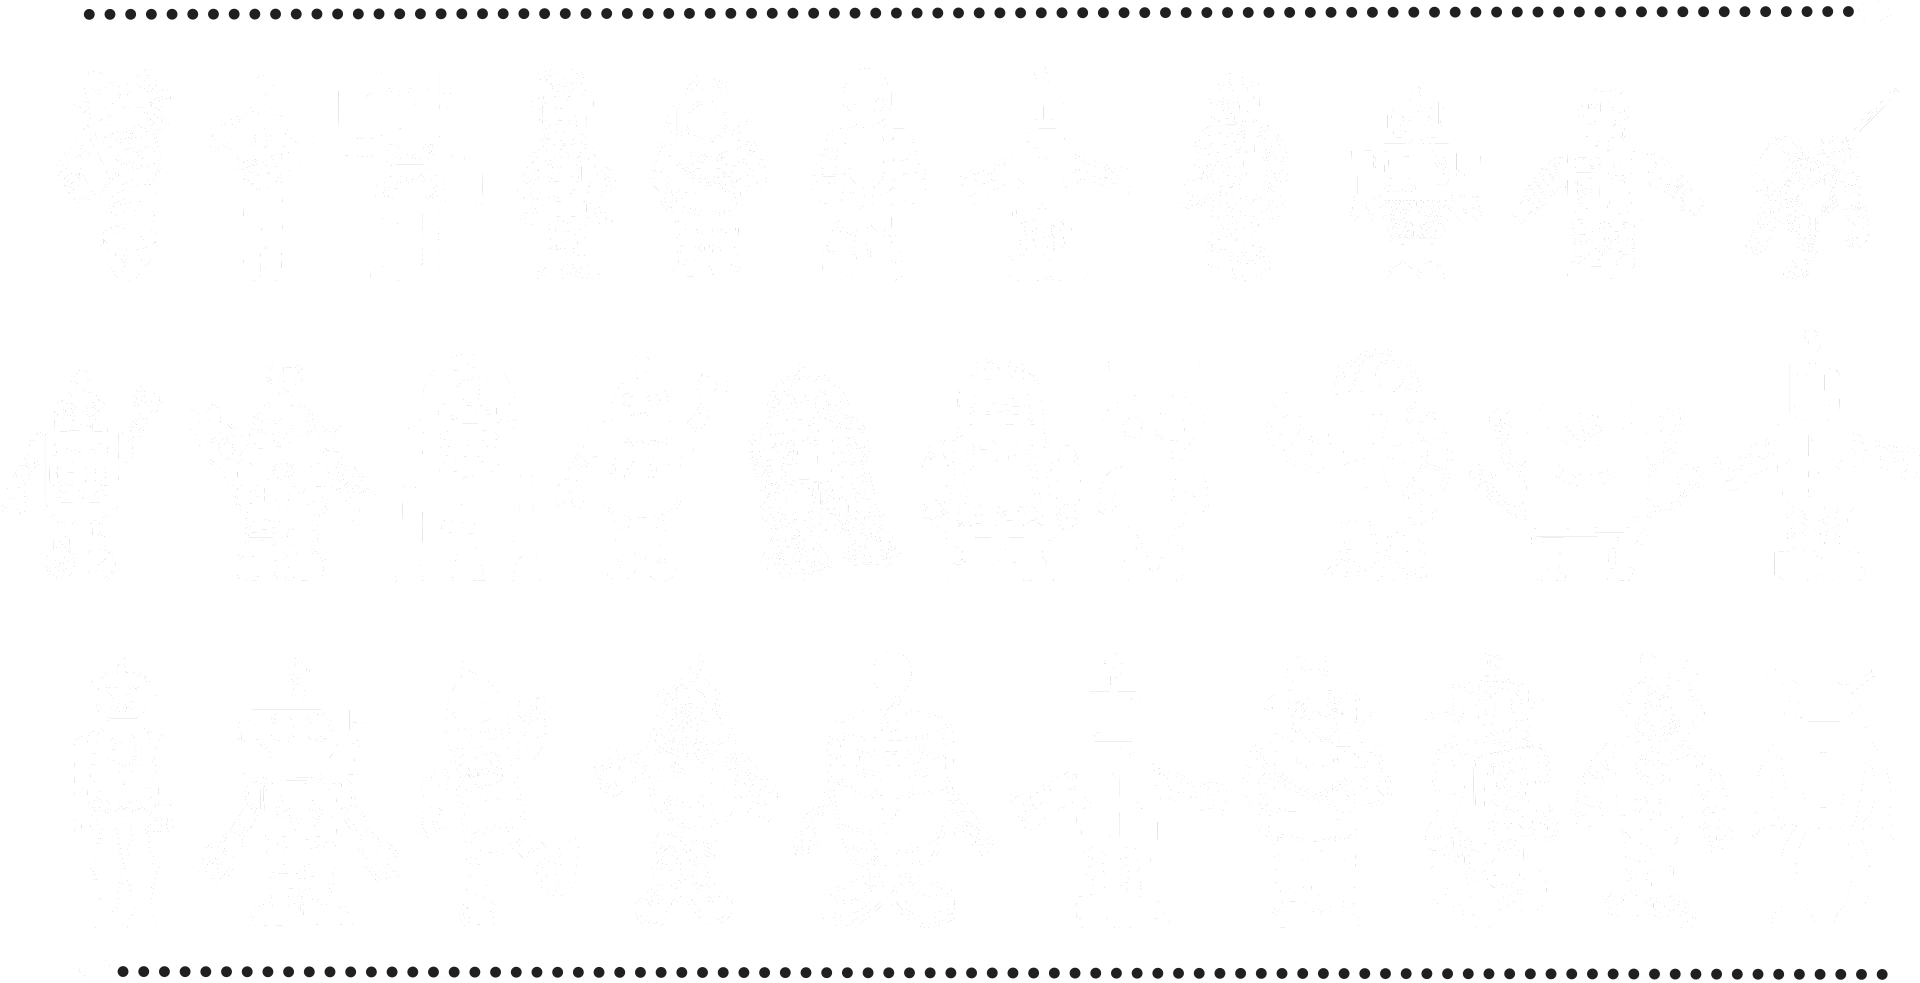 Drawings of robots